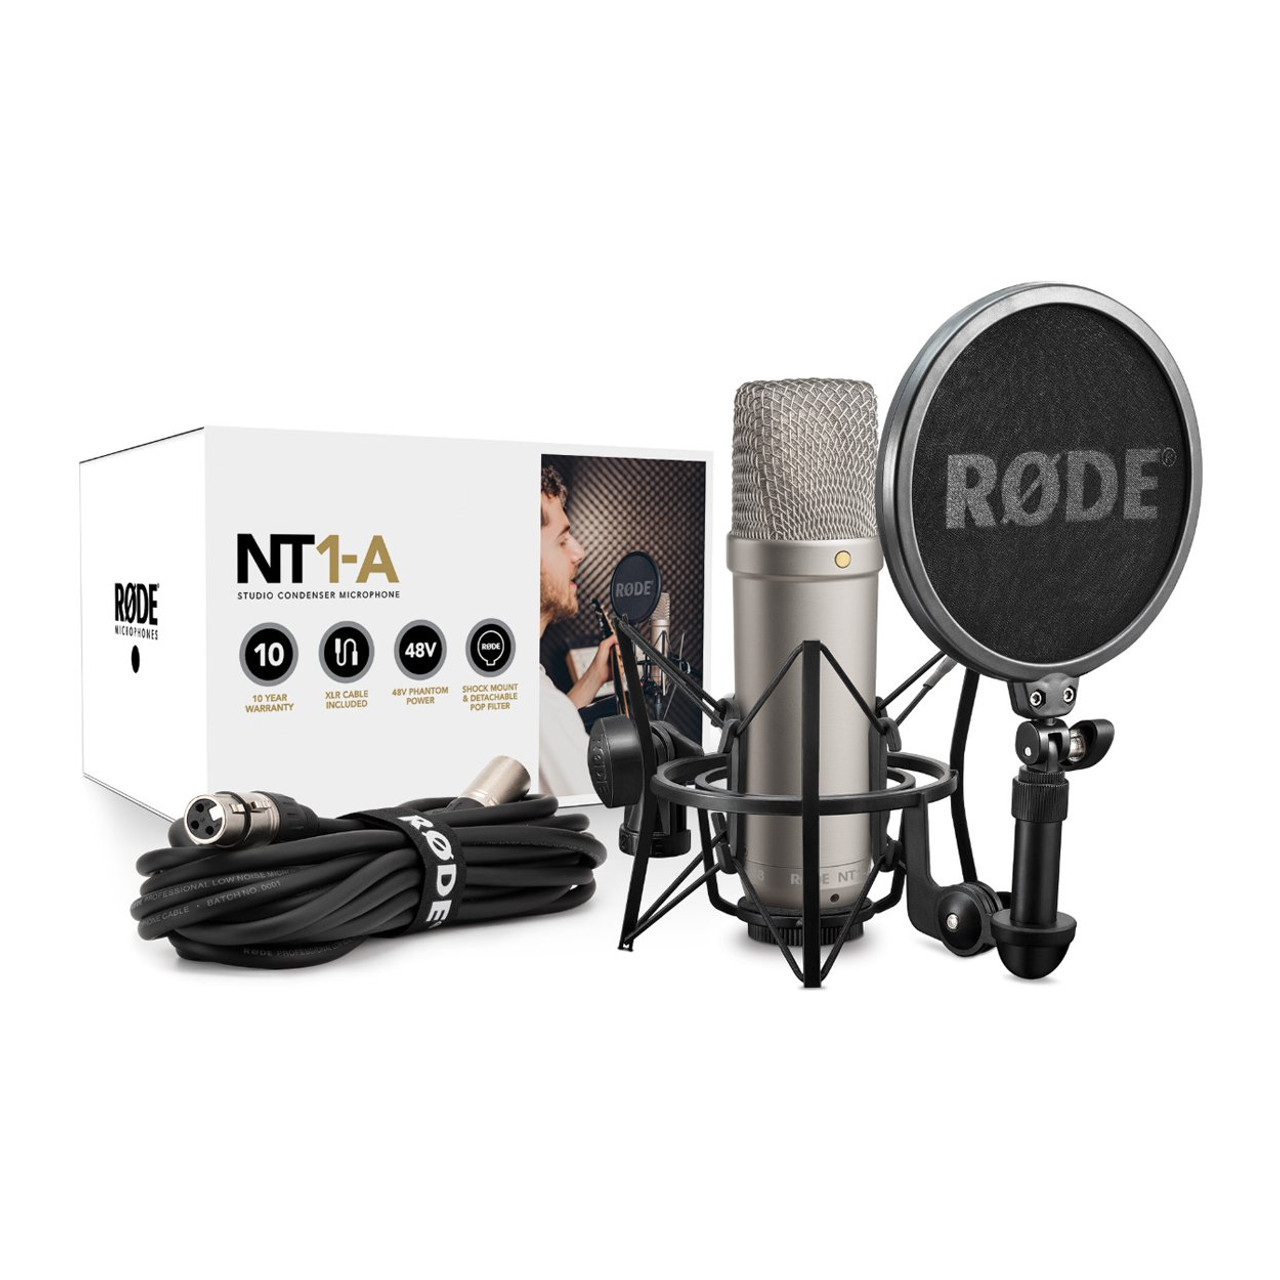 Rode NT1A Vocal Recording Pack